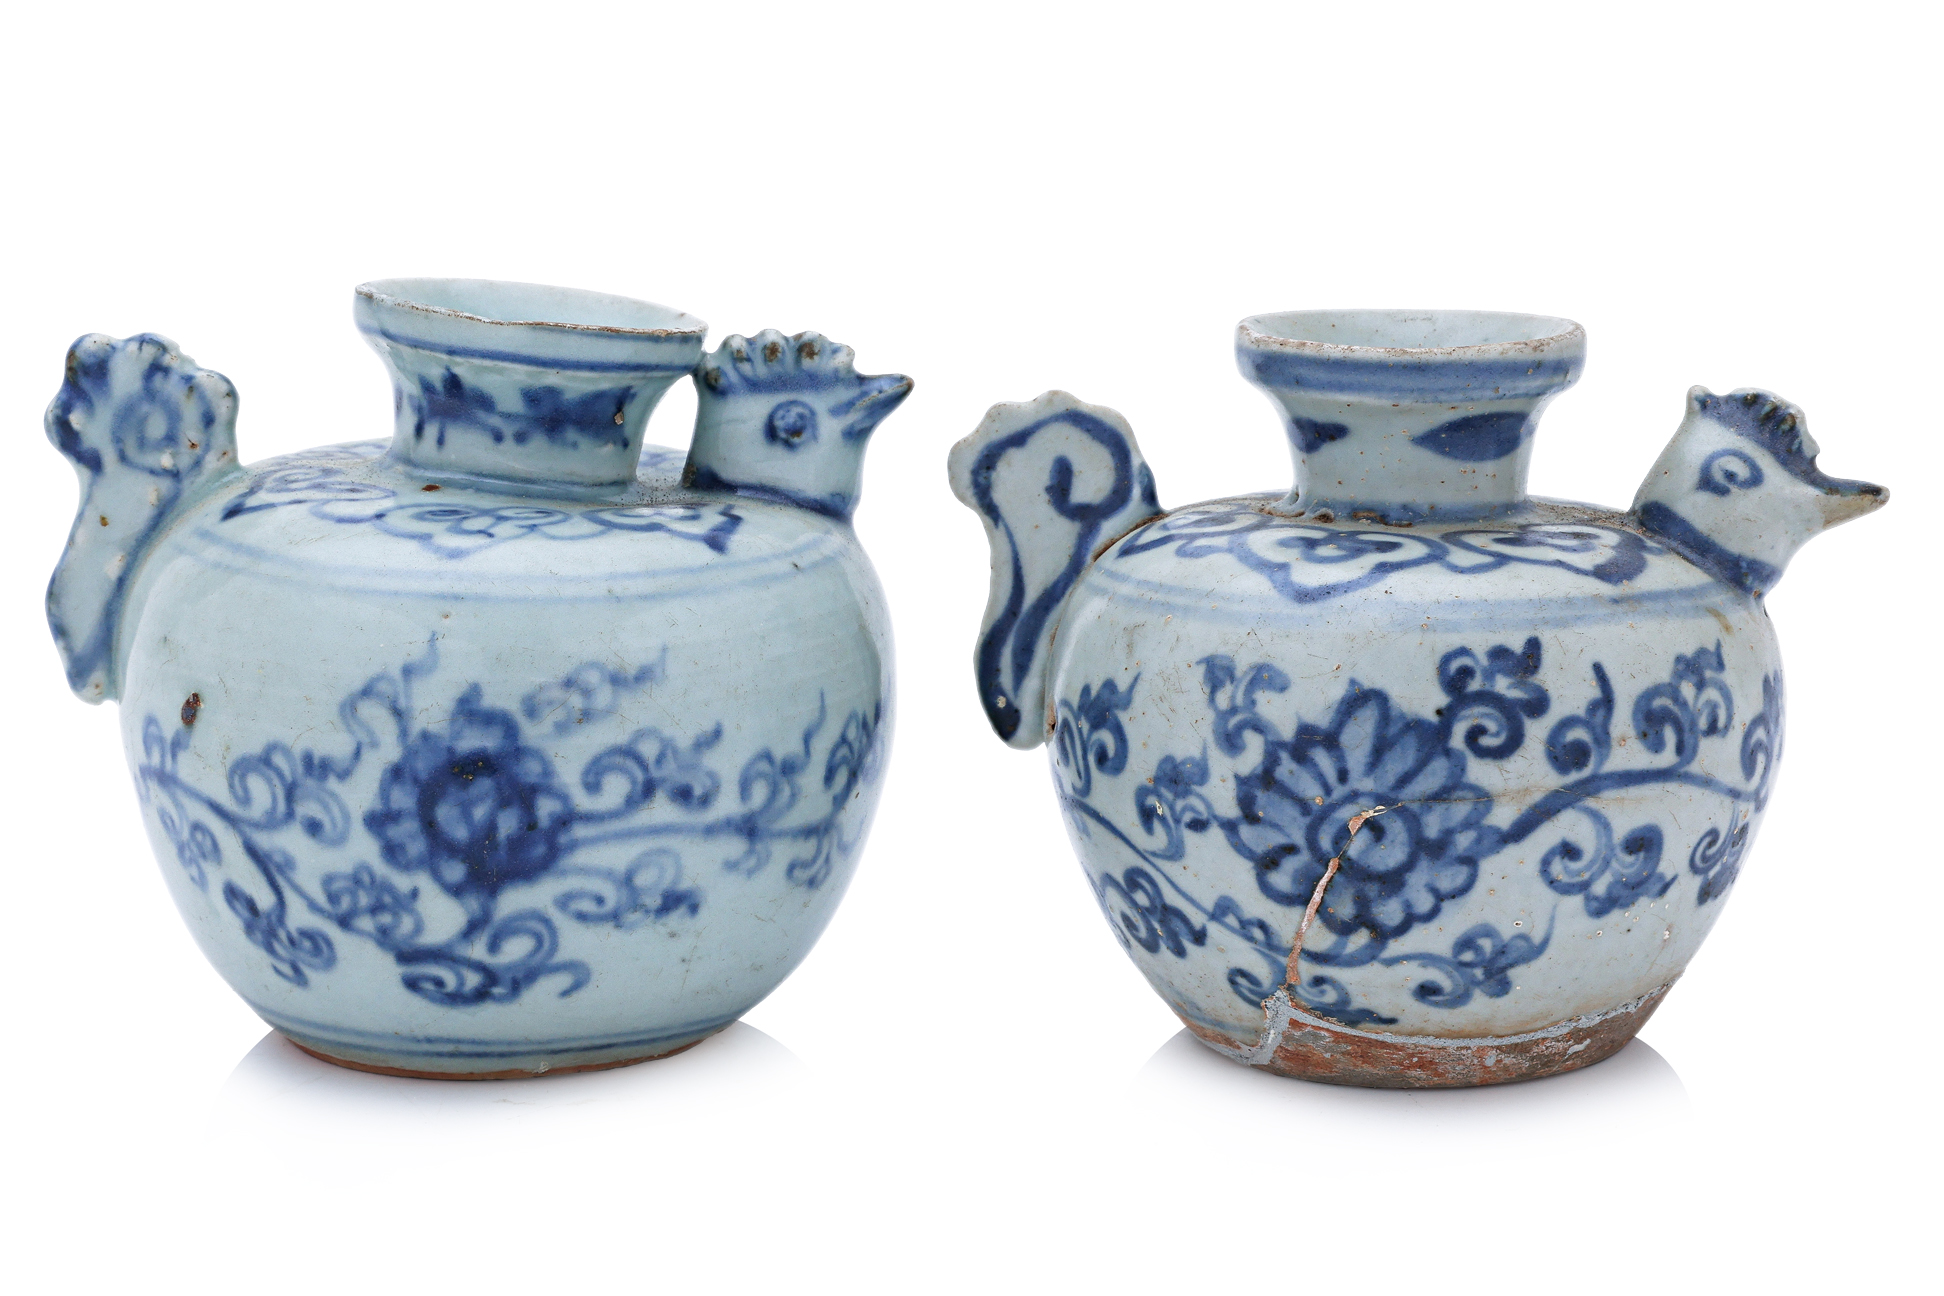 A PAIR OF BLUE AND WHITE PORCELAIN CHICKEN WATER DROPPERS - Image 2 of 4